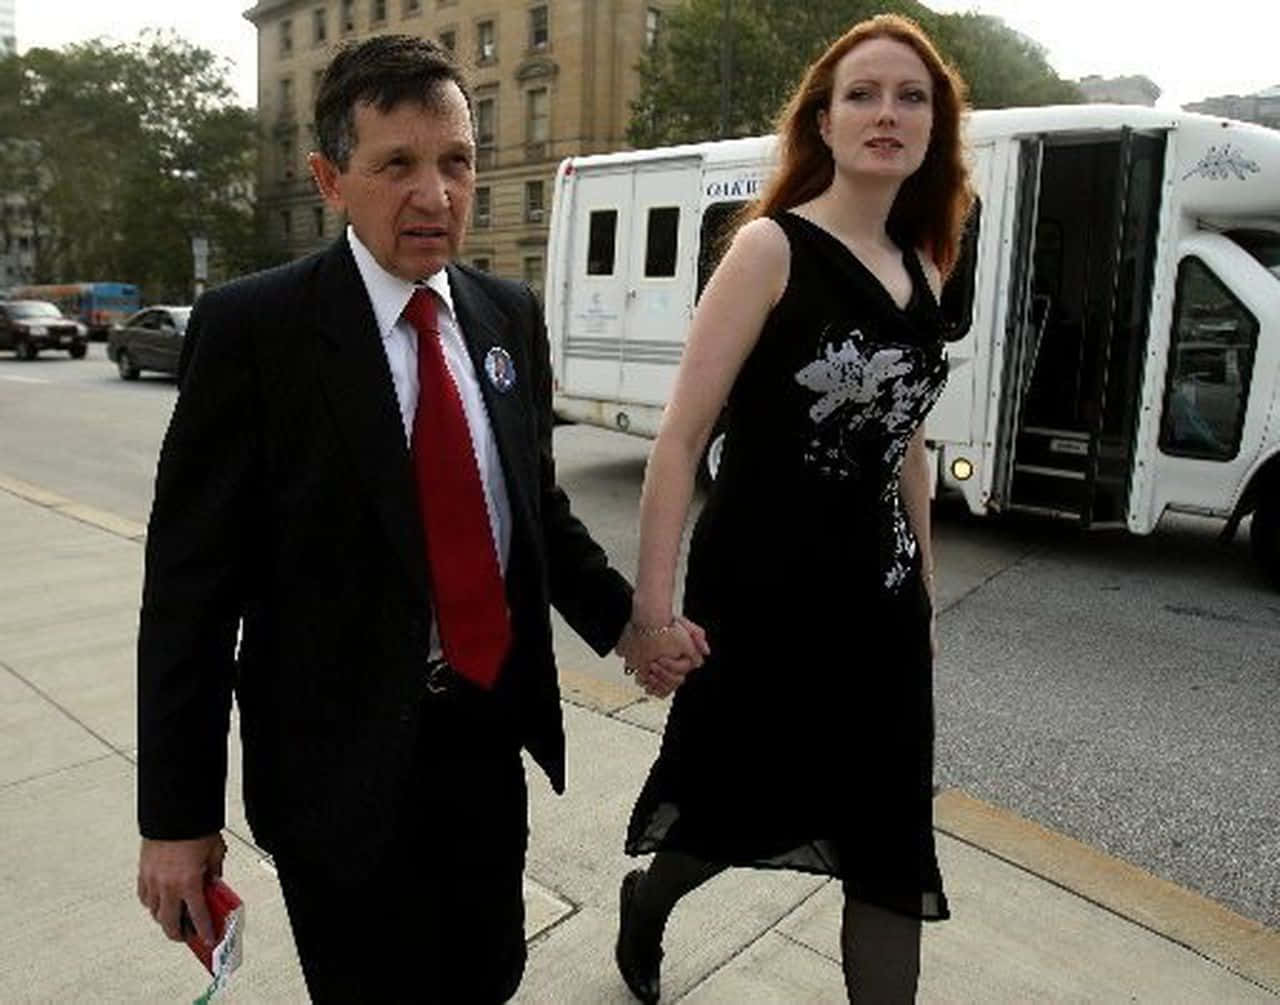 Dennis Kucinich Walking With His Wife Wallpaper